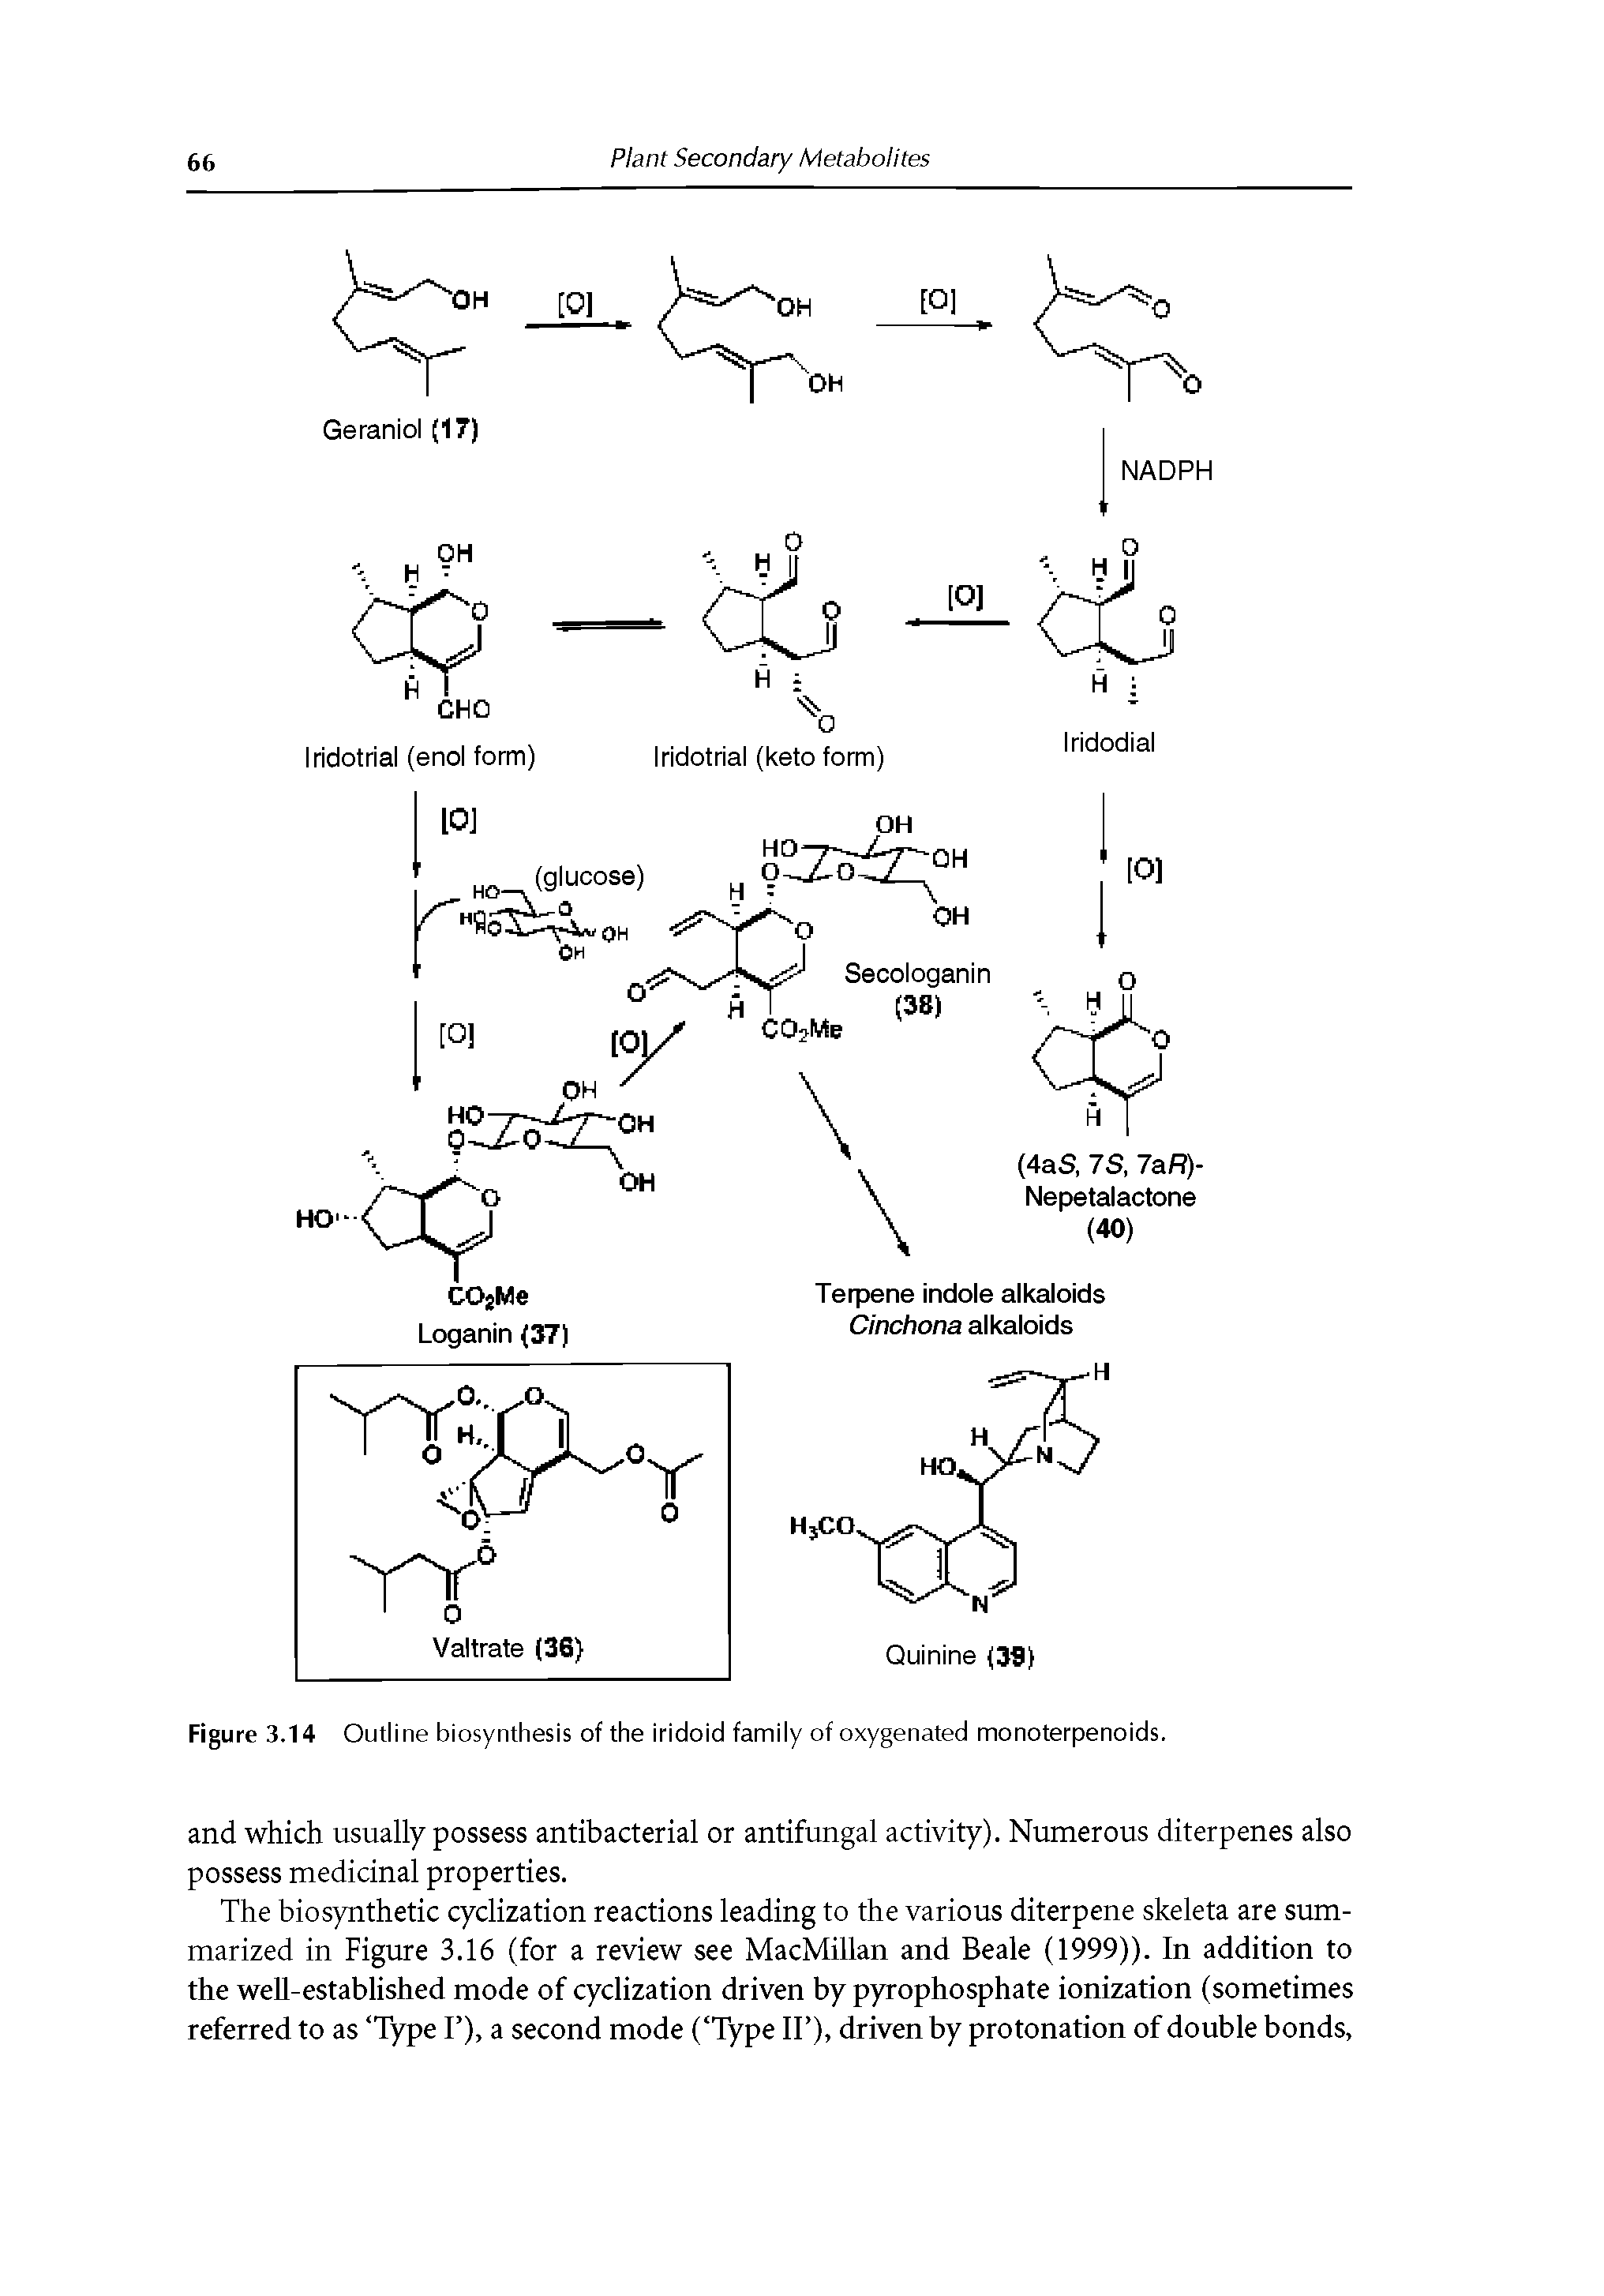 Figure 3.14 Outline biosynthesis of the iridoid family of oxygenated monoterpenoids.